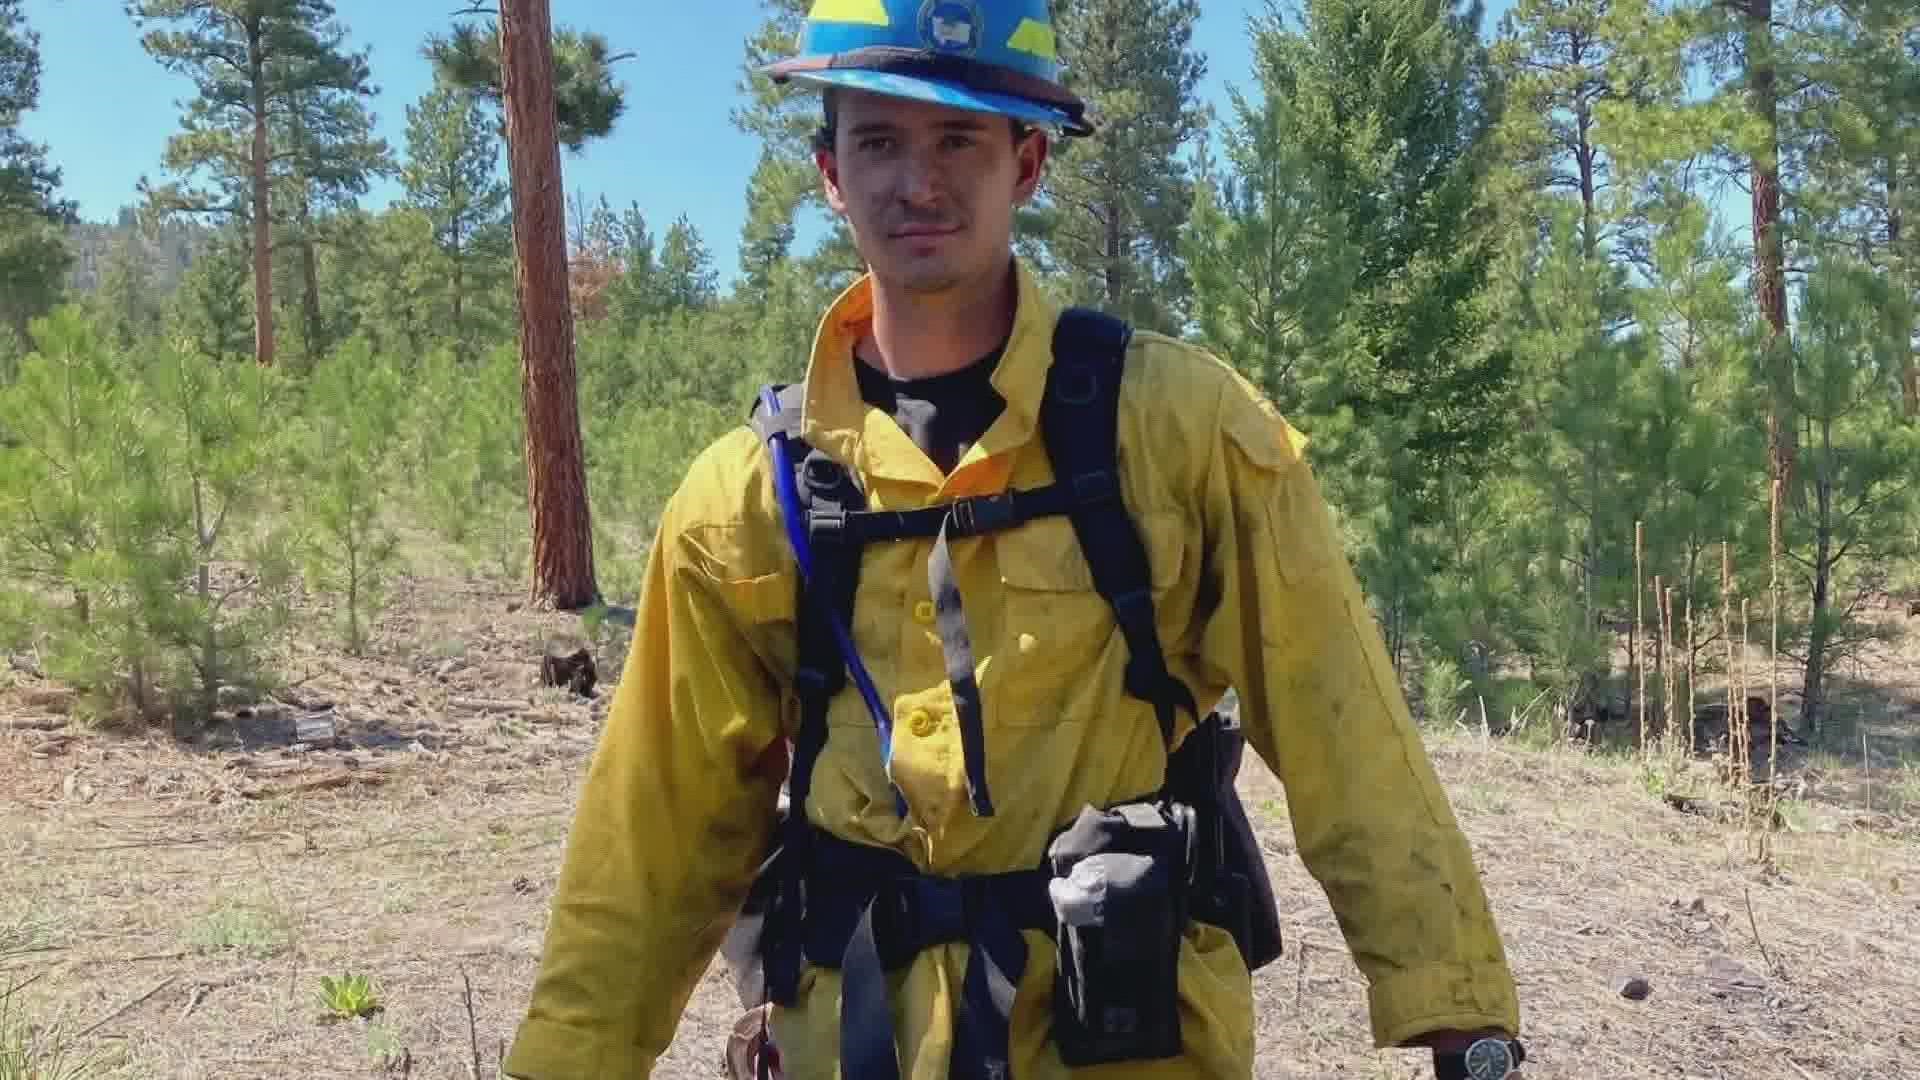 He is the fourth generation of firefighters in his family.